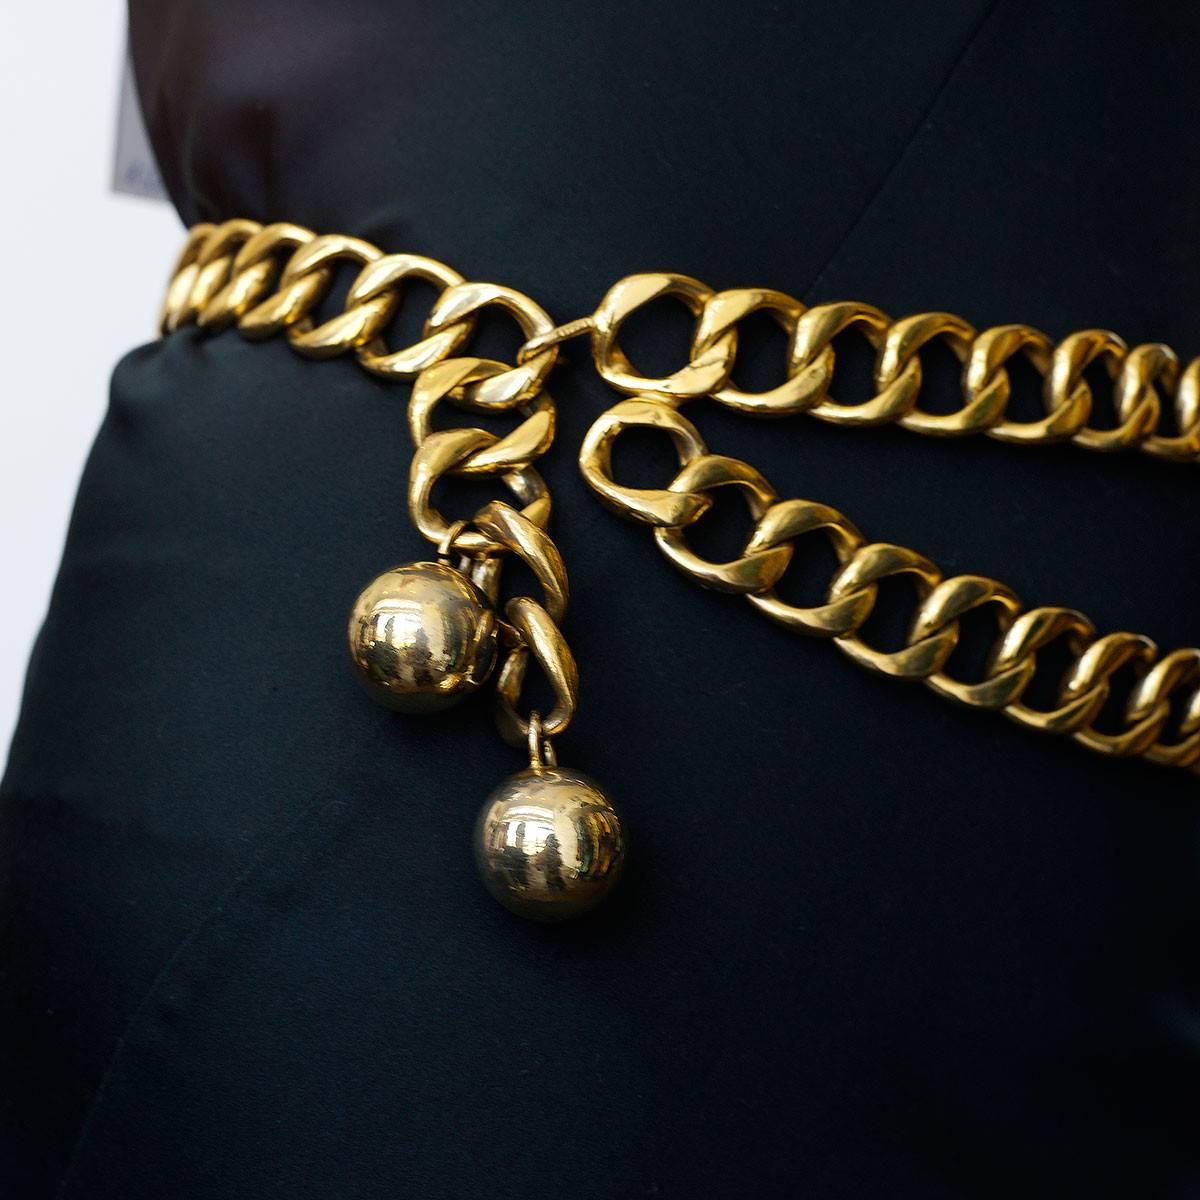 Gold Classic Chanel Double Chain Belt